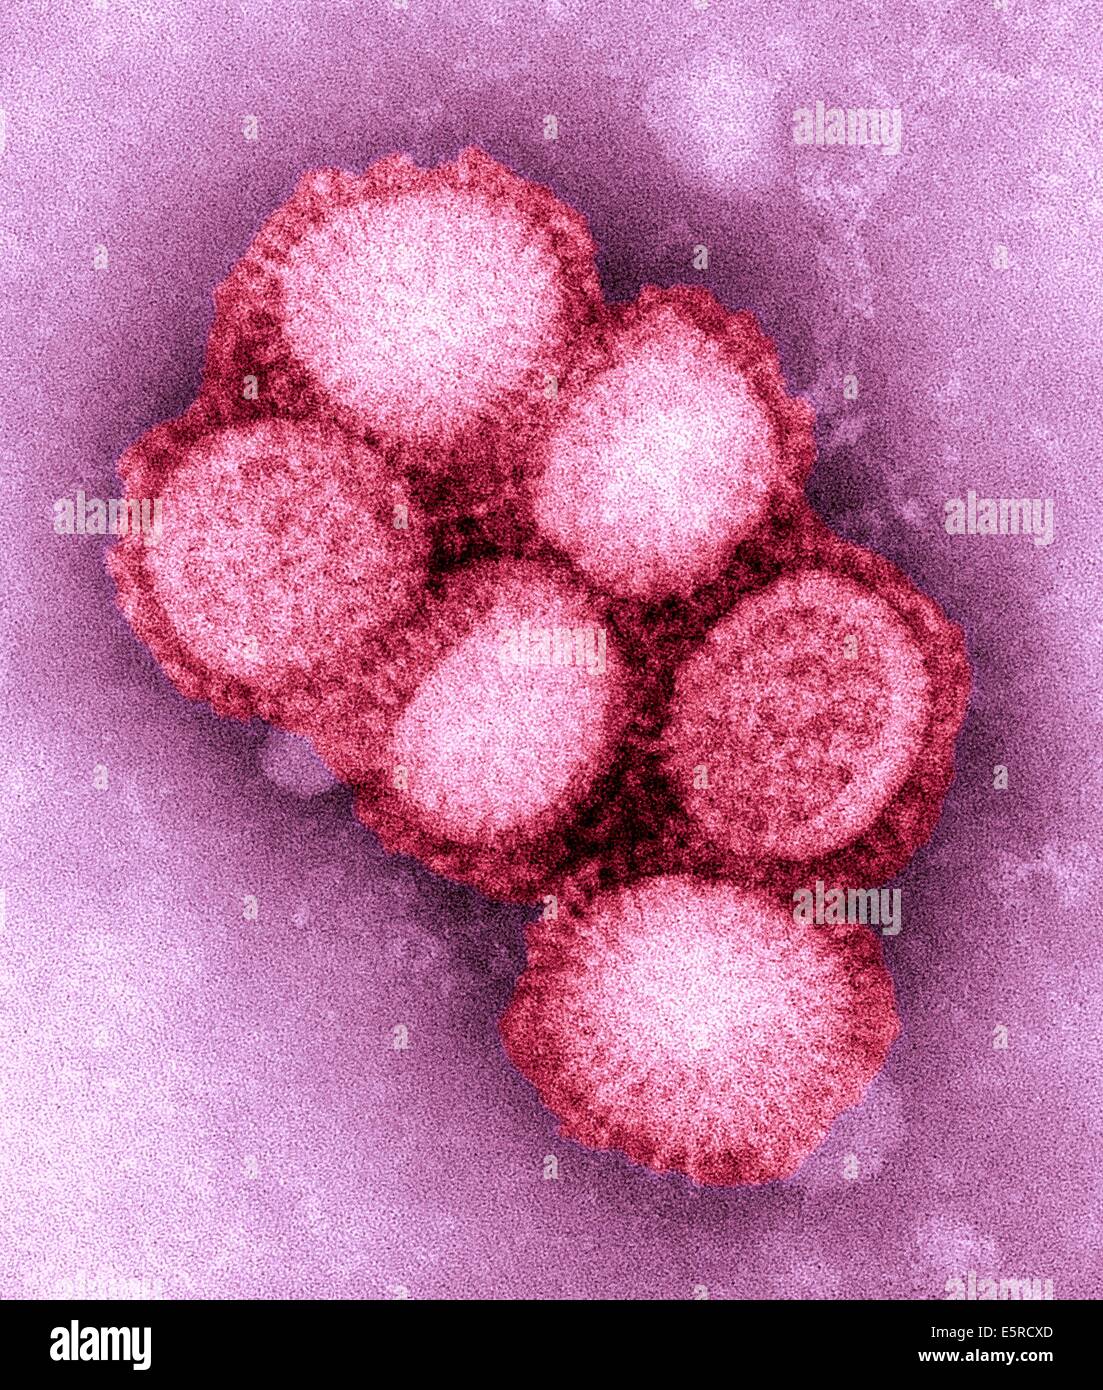 Swine Influenza (swine flu) is a respiratory disease of pigs caused by type A influenza virus that regularly causes outbreaks Stock Photo